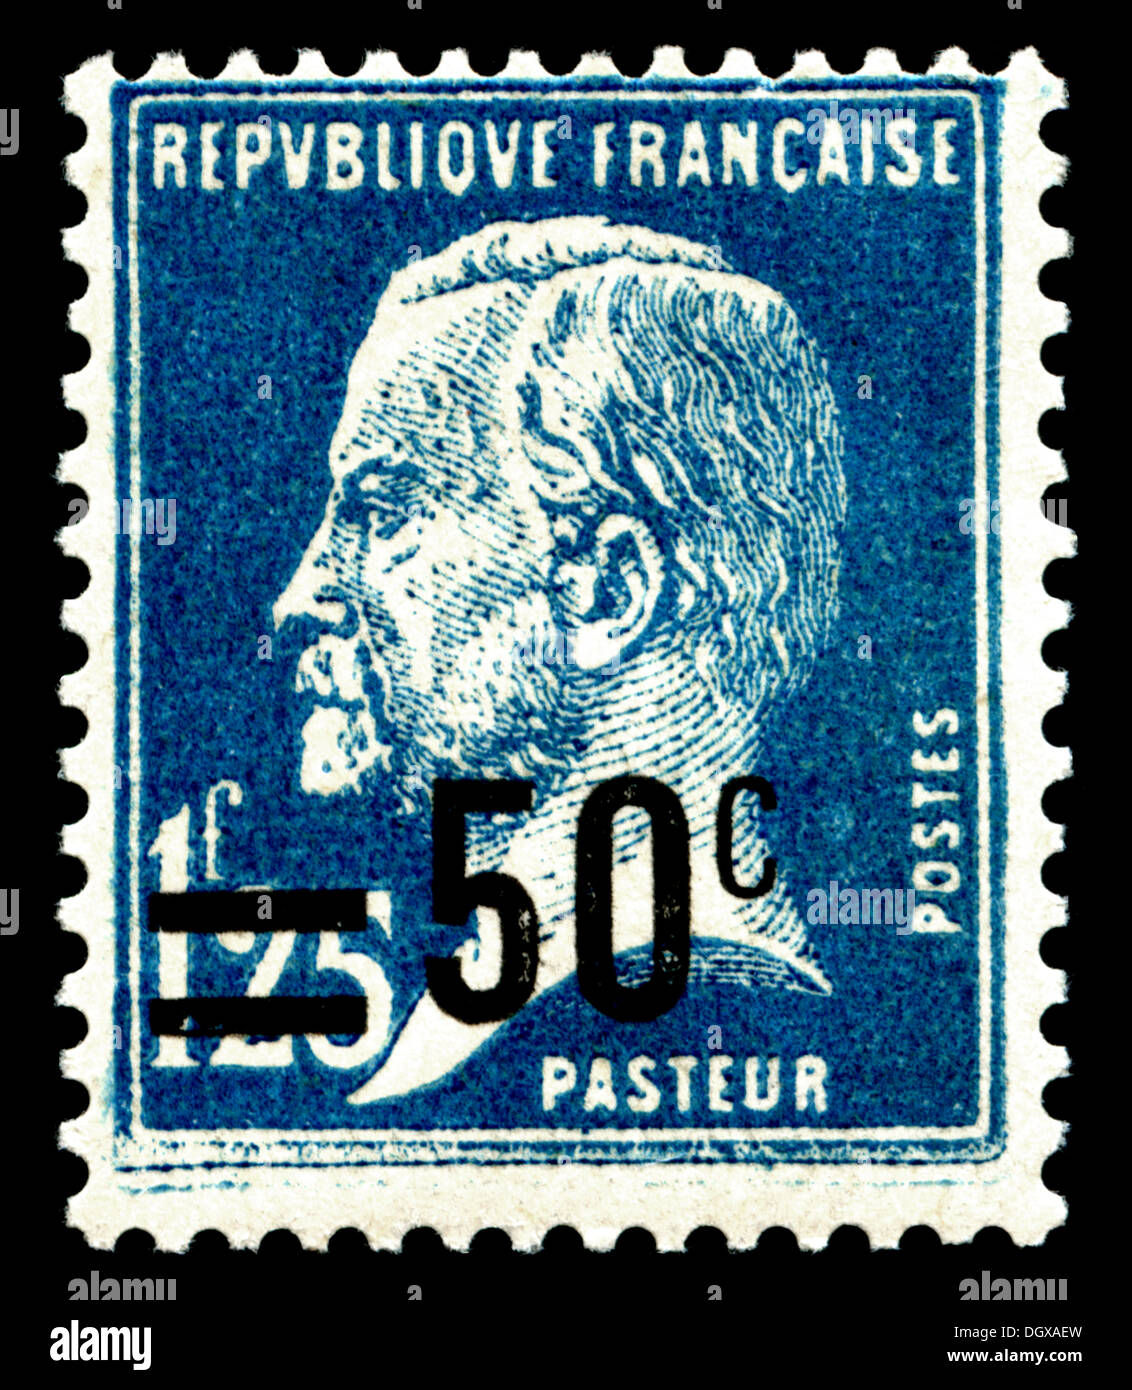 France postage stamp depicting Louis Pasteur Stock Photo